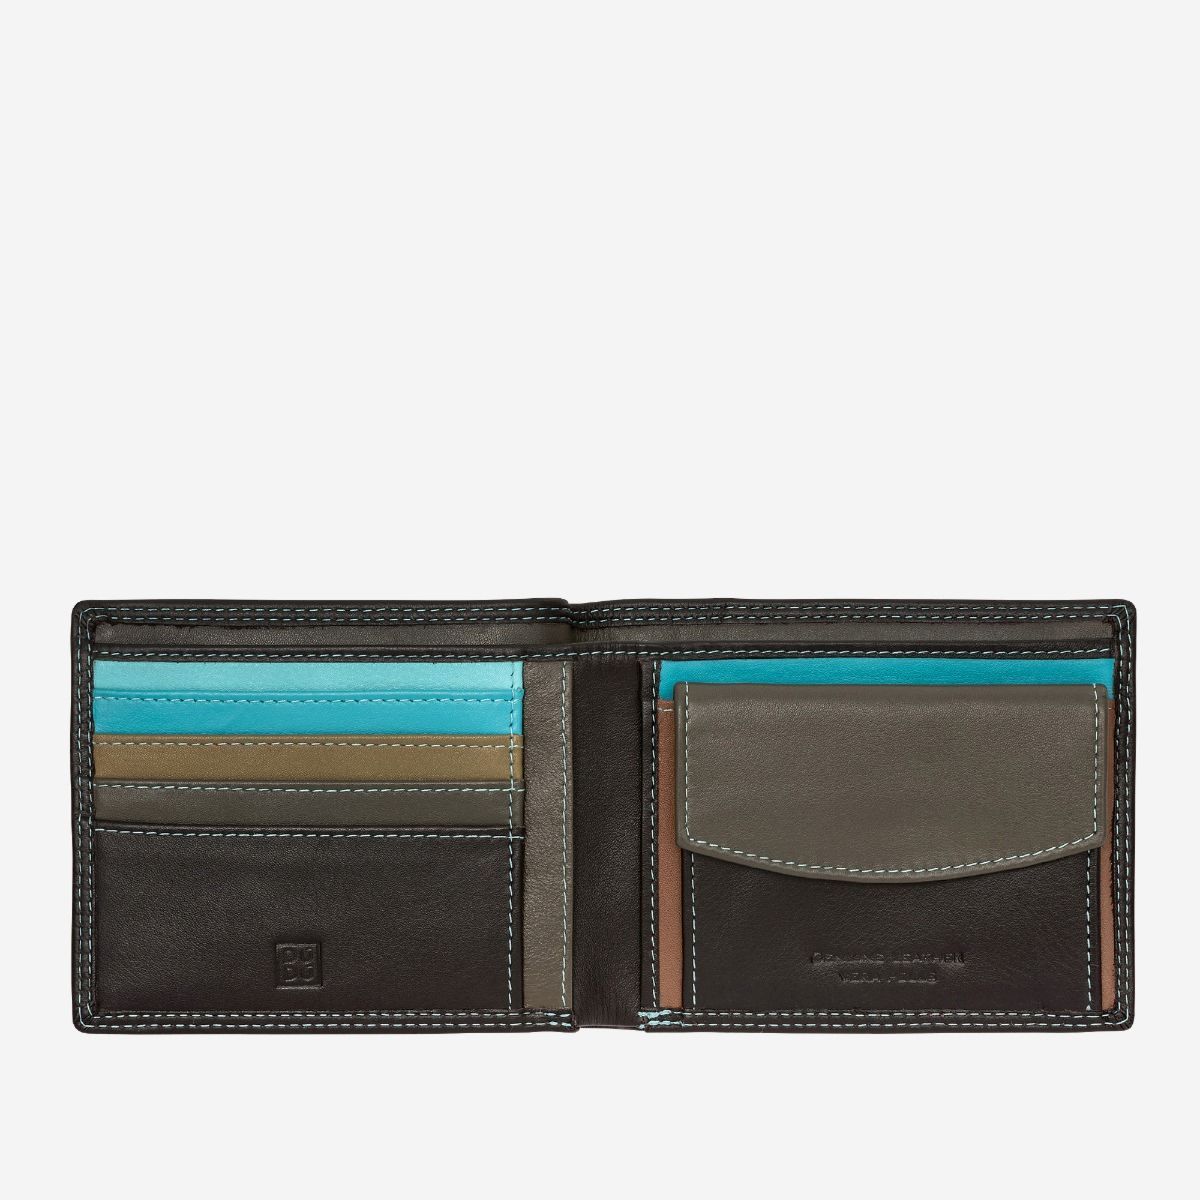 DuDu Slim Leather Multi Color Callet With Coin Purse - Dark Brown